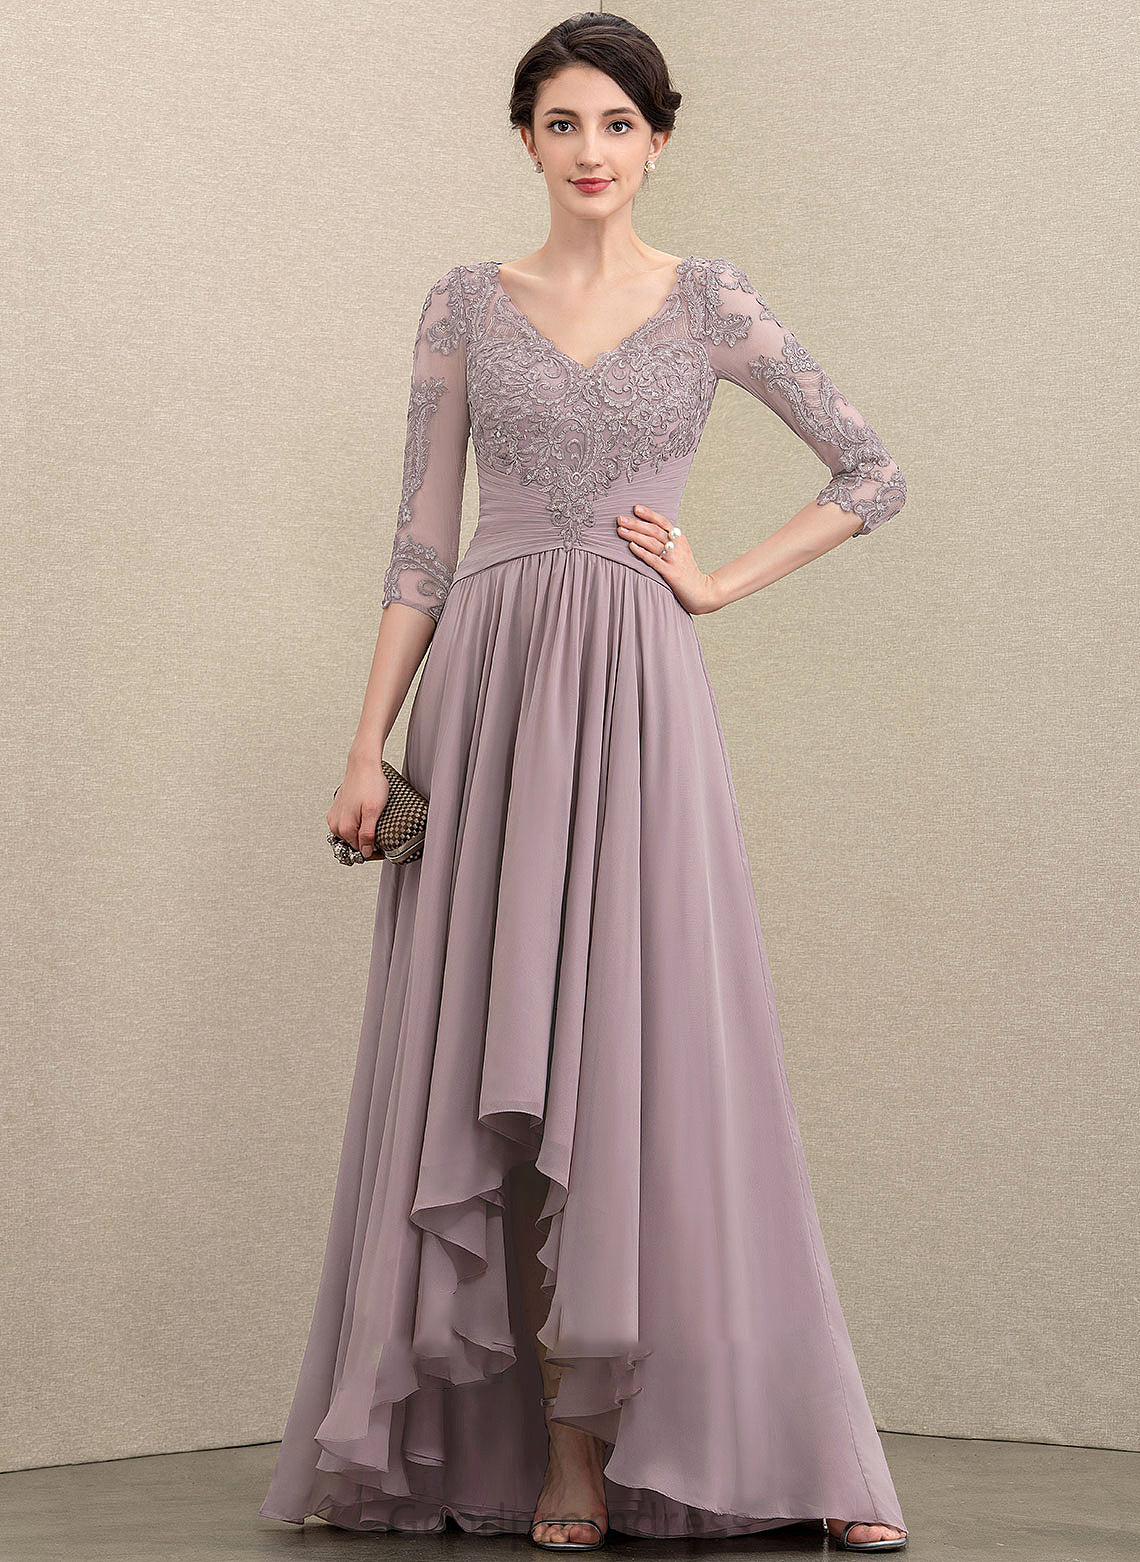 A-Line Lace With Dress Mother of the Bride Dresses Chiffon Mother Janiya Asymmetrical of Bride the Sequins V-neck